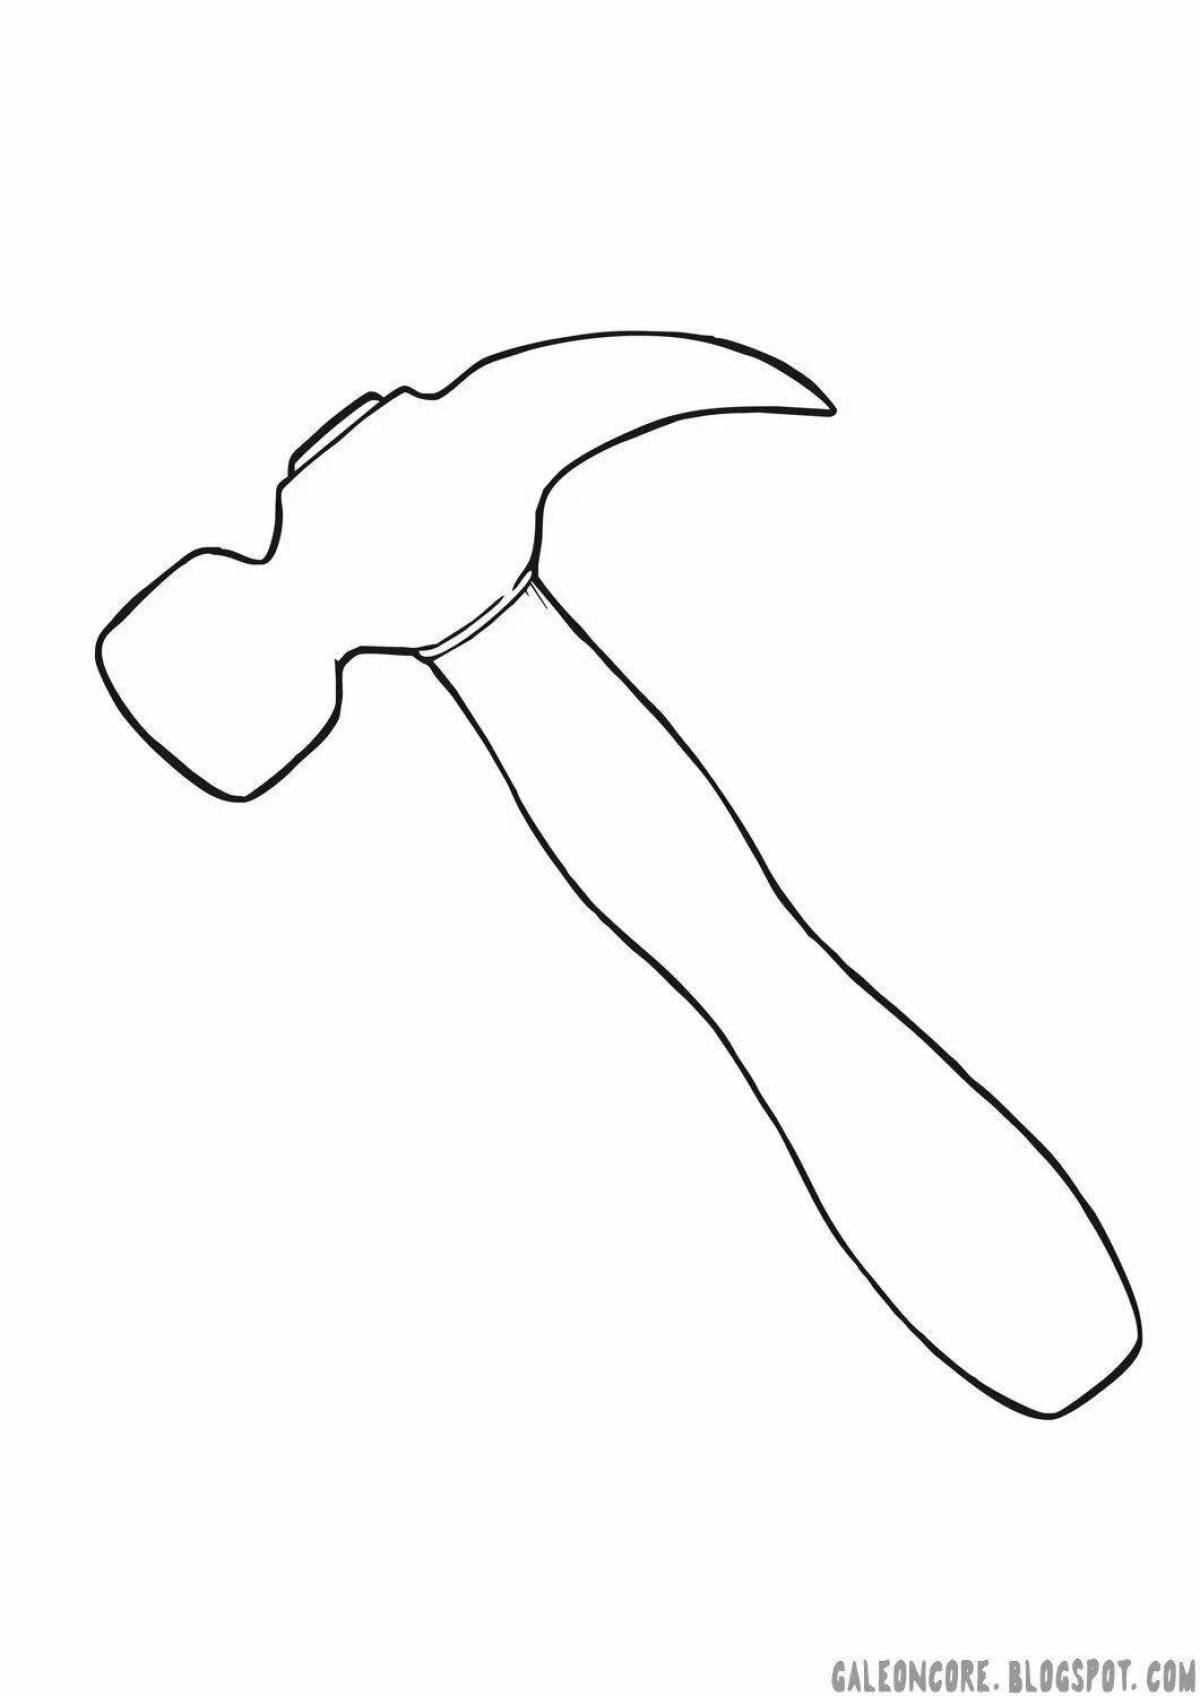 Colorful hammer coloring page for kids